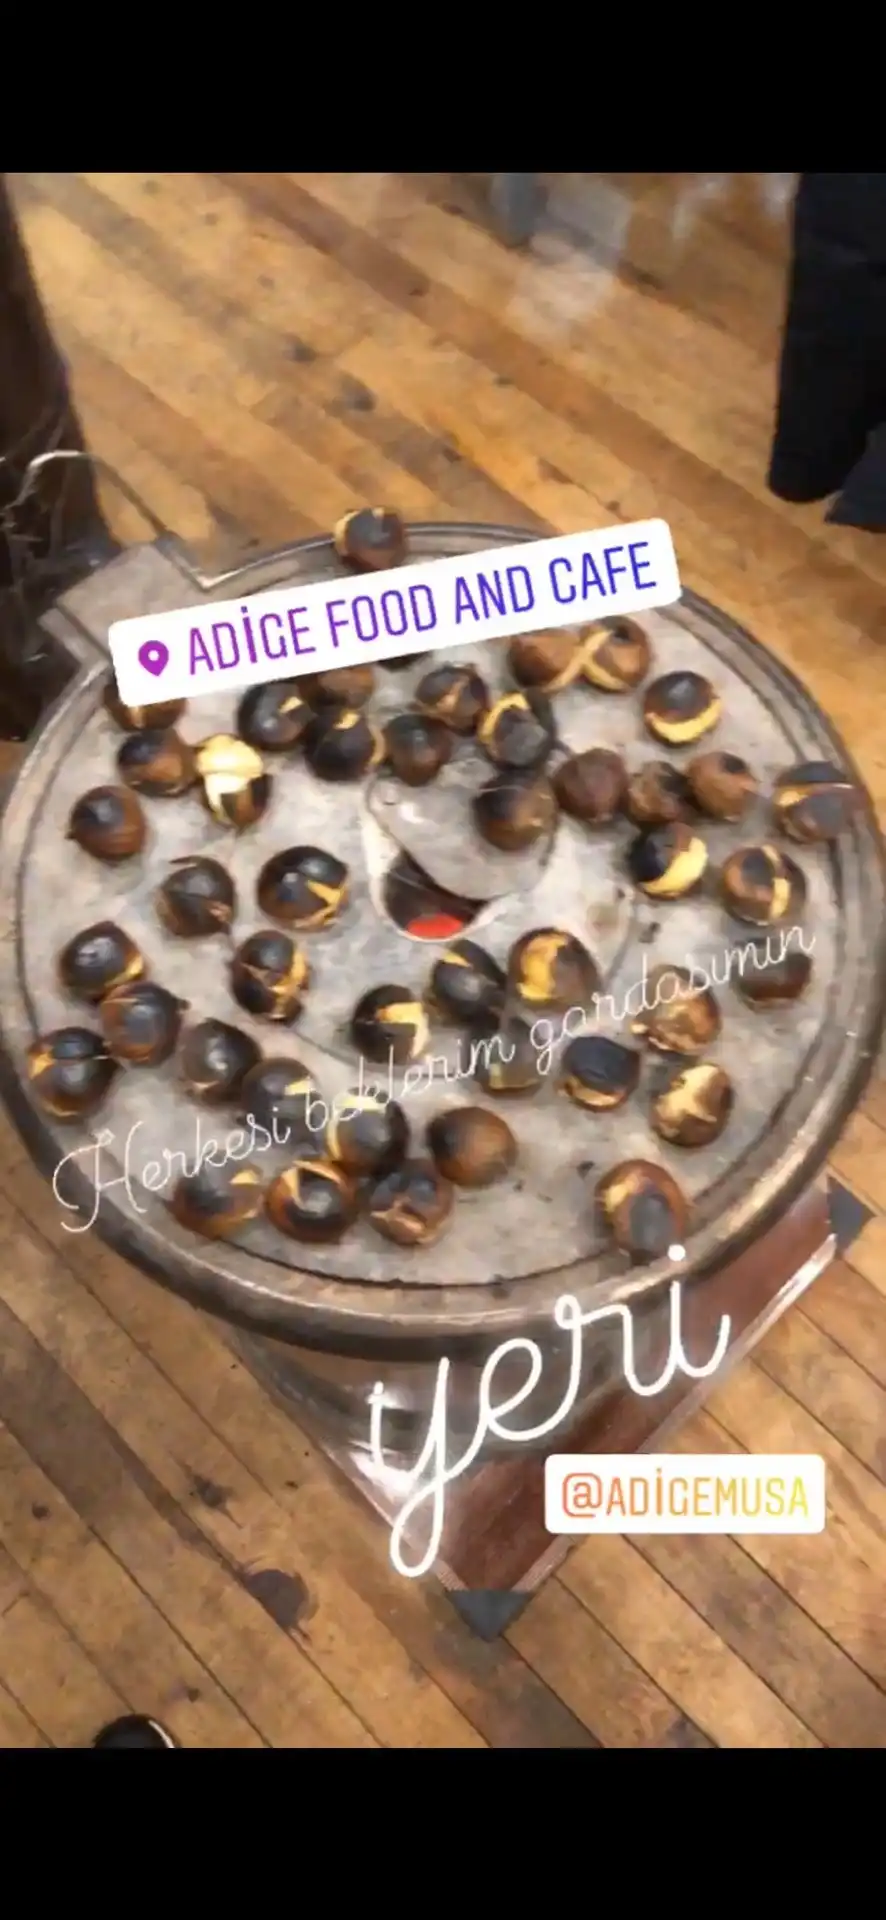 Adige Food And Cafe